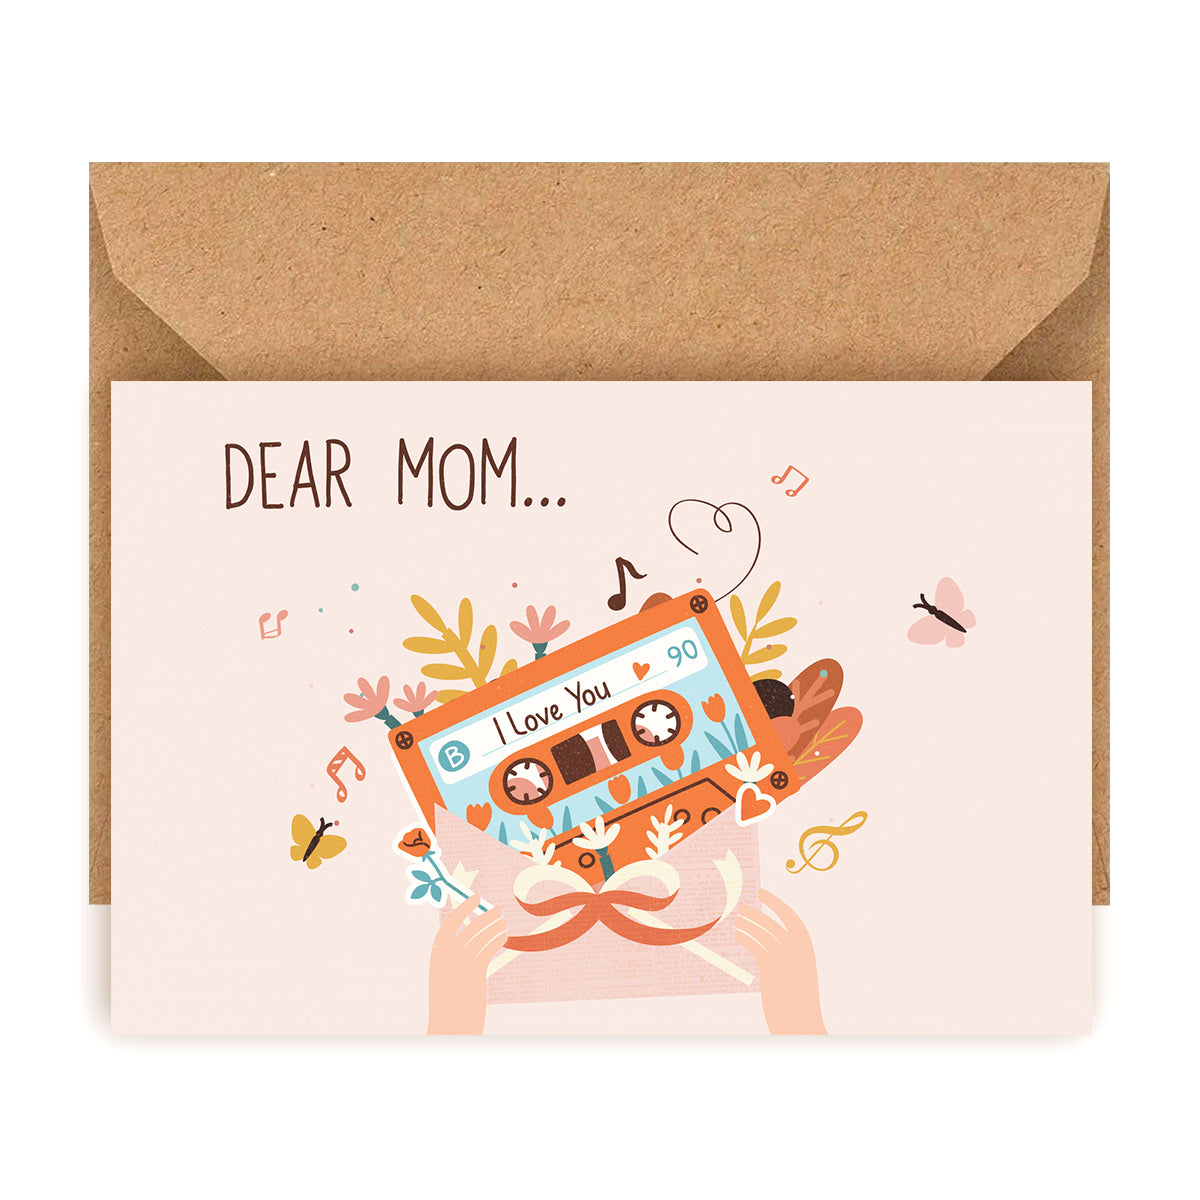 Dear Mom Card for Sale Online, Mother's Day Succulent Greeting Card, Succulent Greeting Card for Mother's Day, Buy Unique Greeting Cards Online